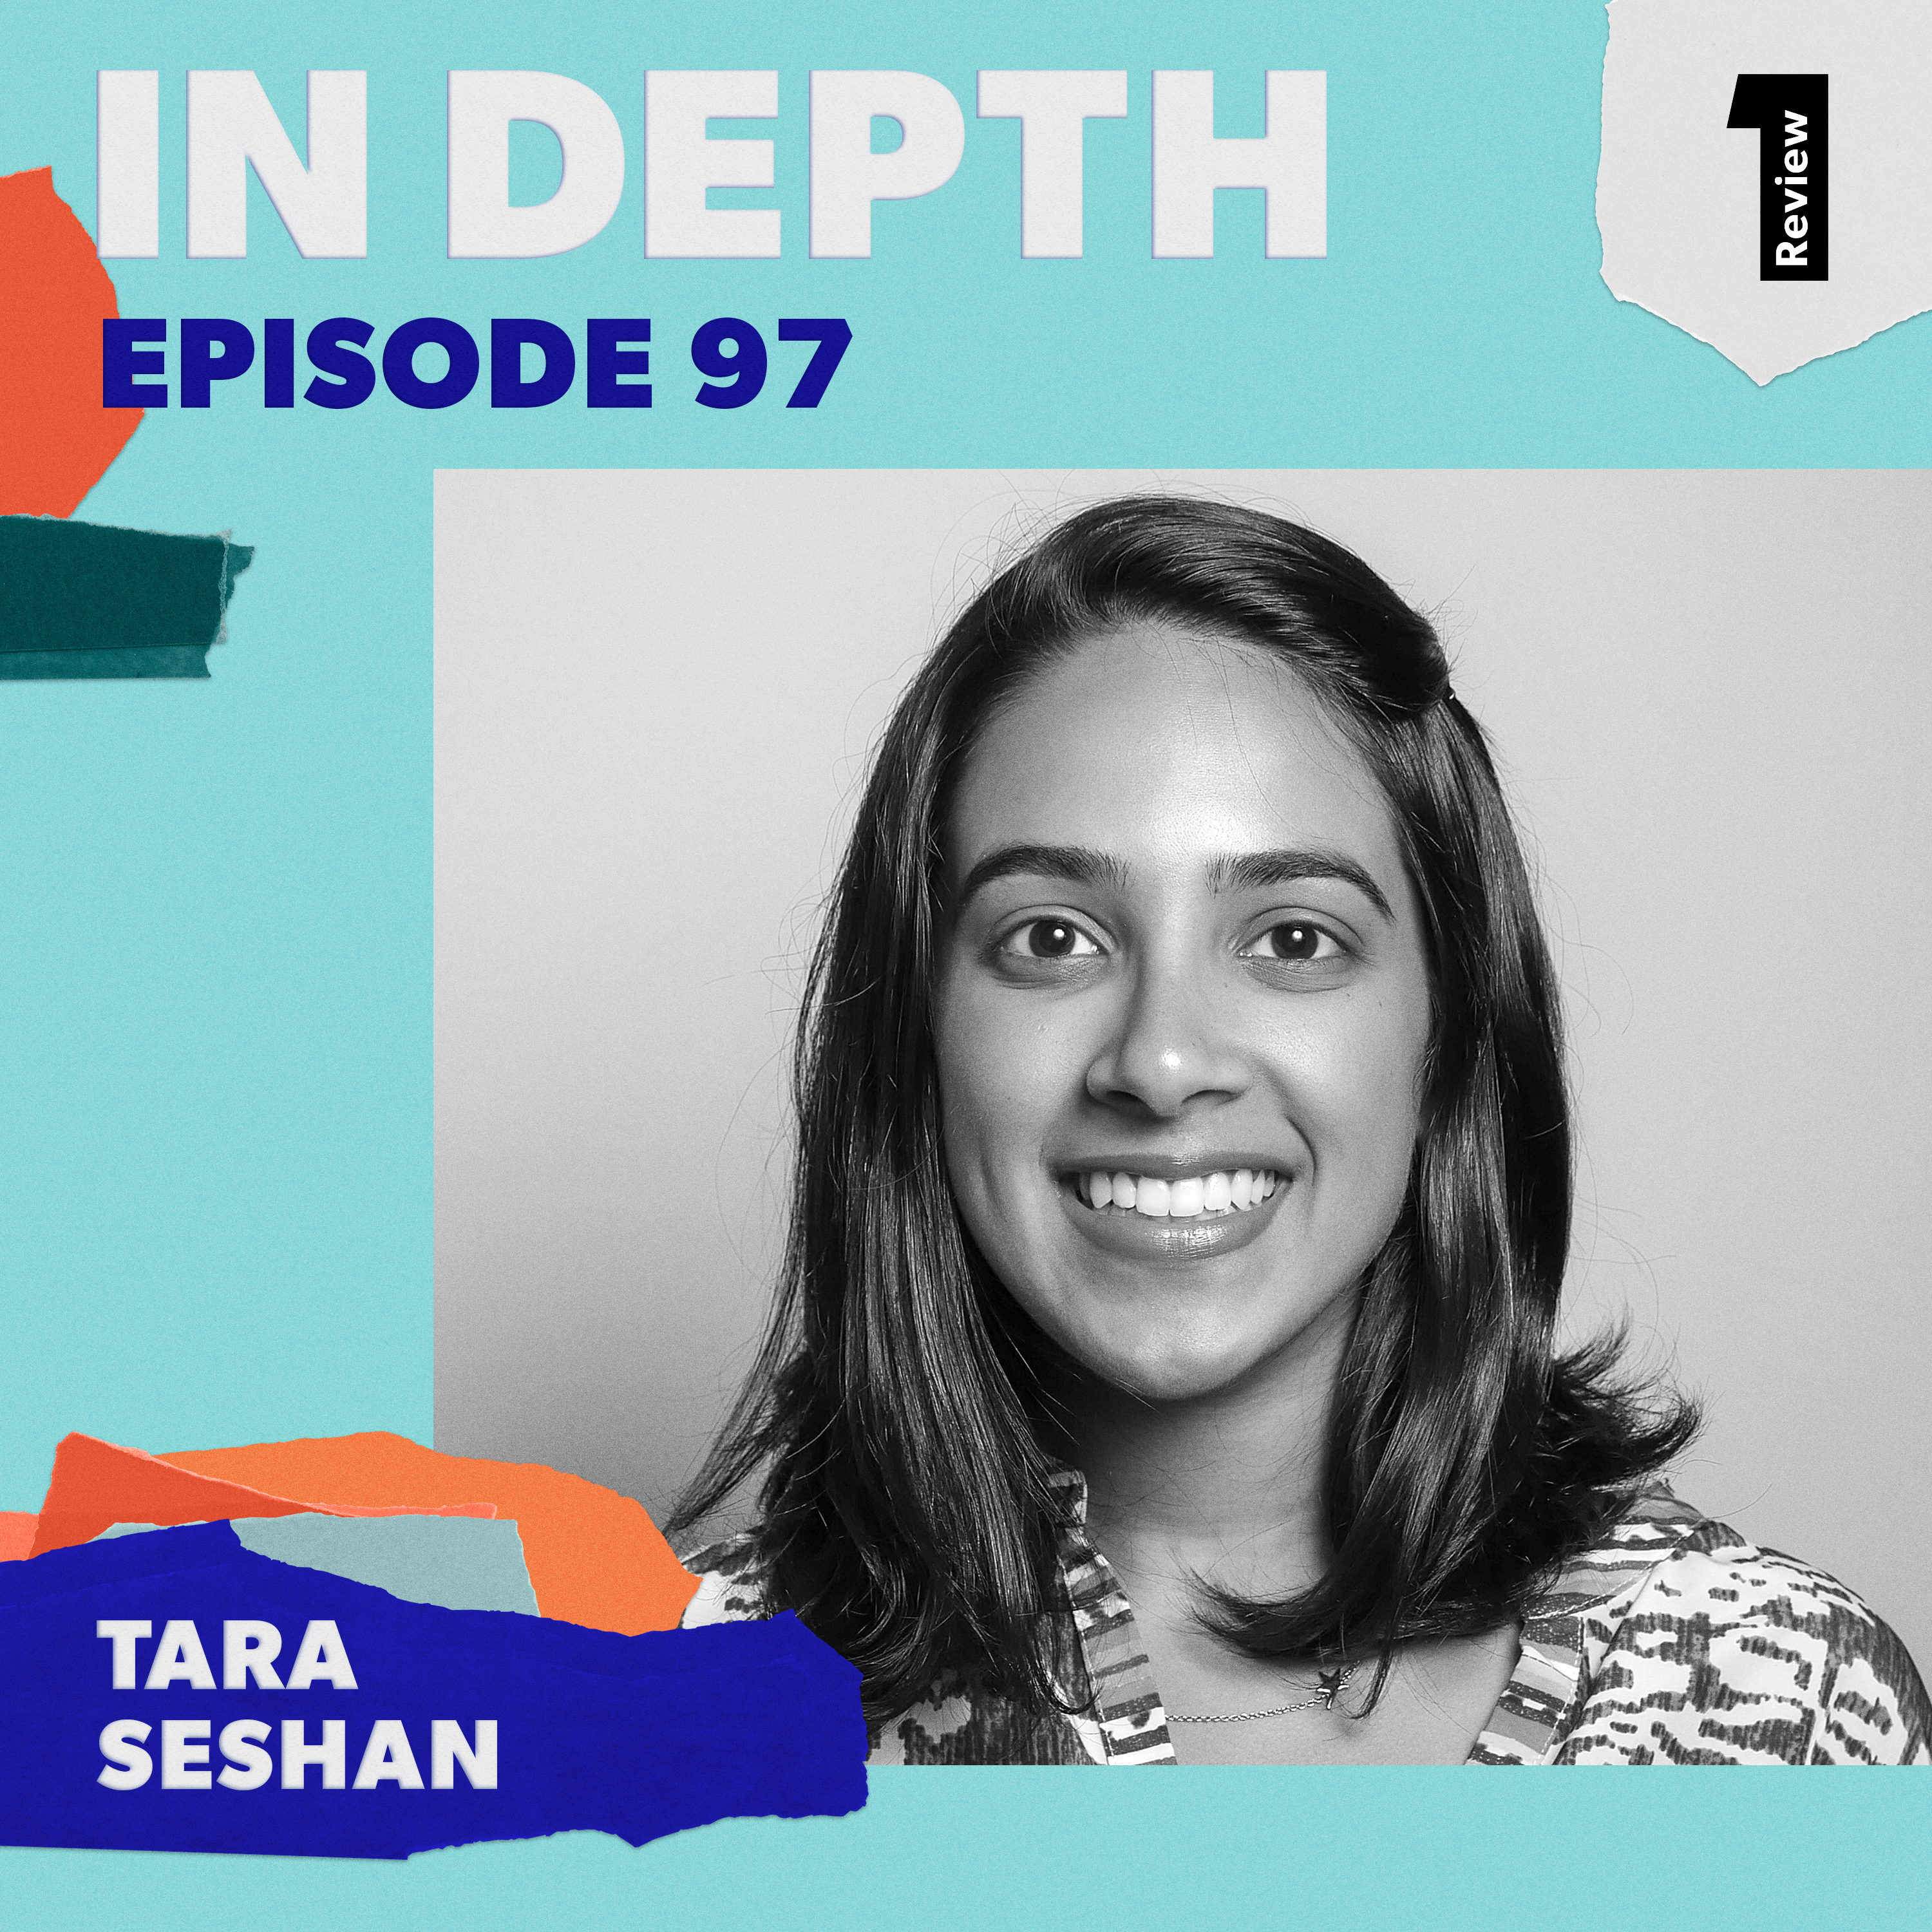 Lessons from Stripe on adding new products - Assessing ideas, structuring teams, and tactics for product reviews | Tara Seshan (Watershed, Stripe)